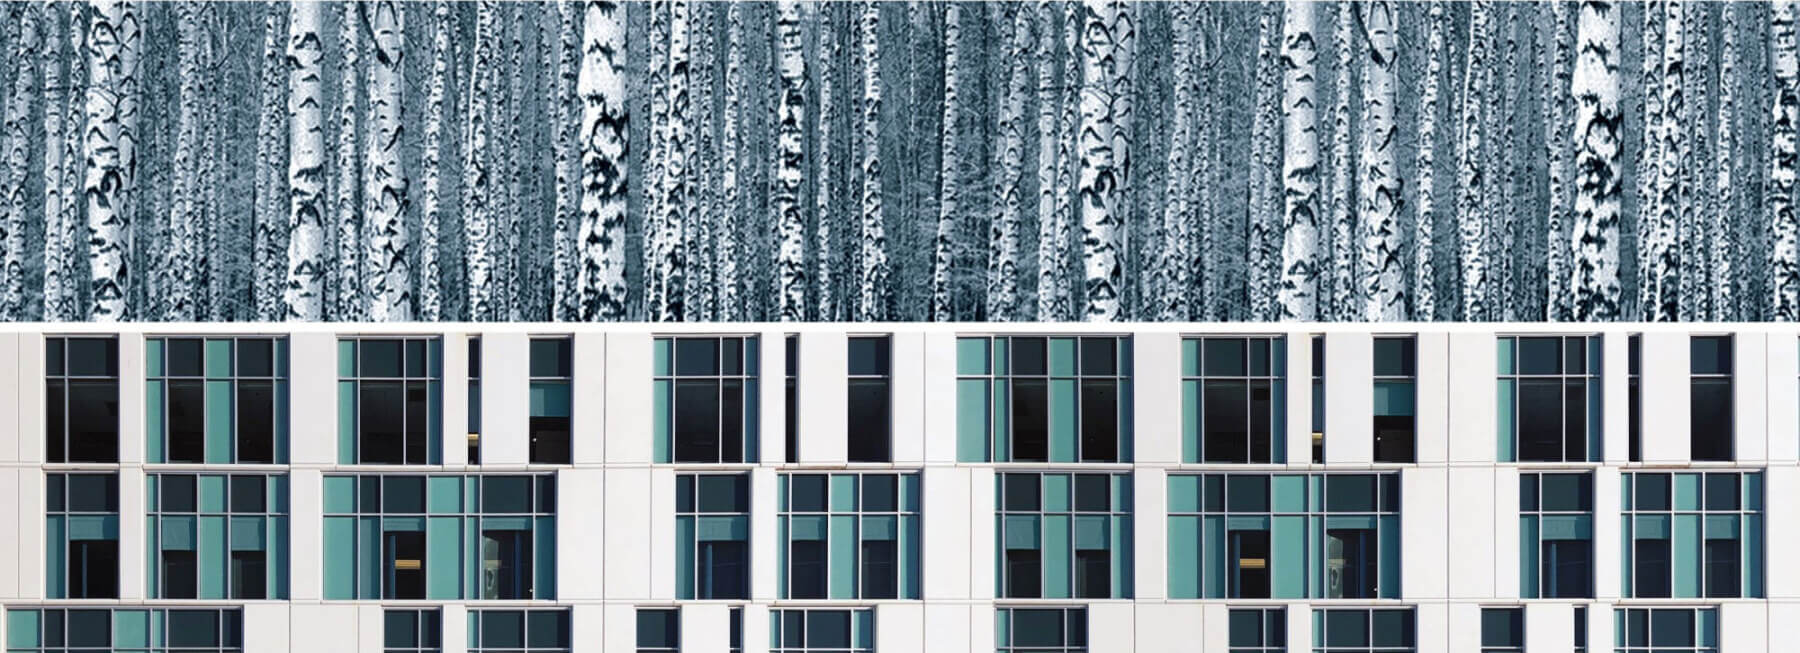 birch tree trunks and limbs demonstrating design inspiration for exterior windows